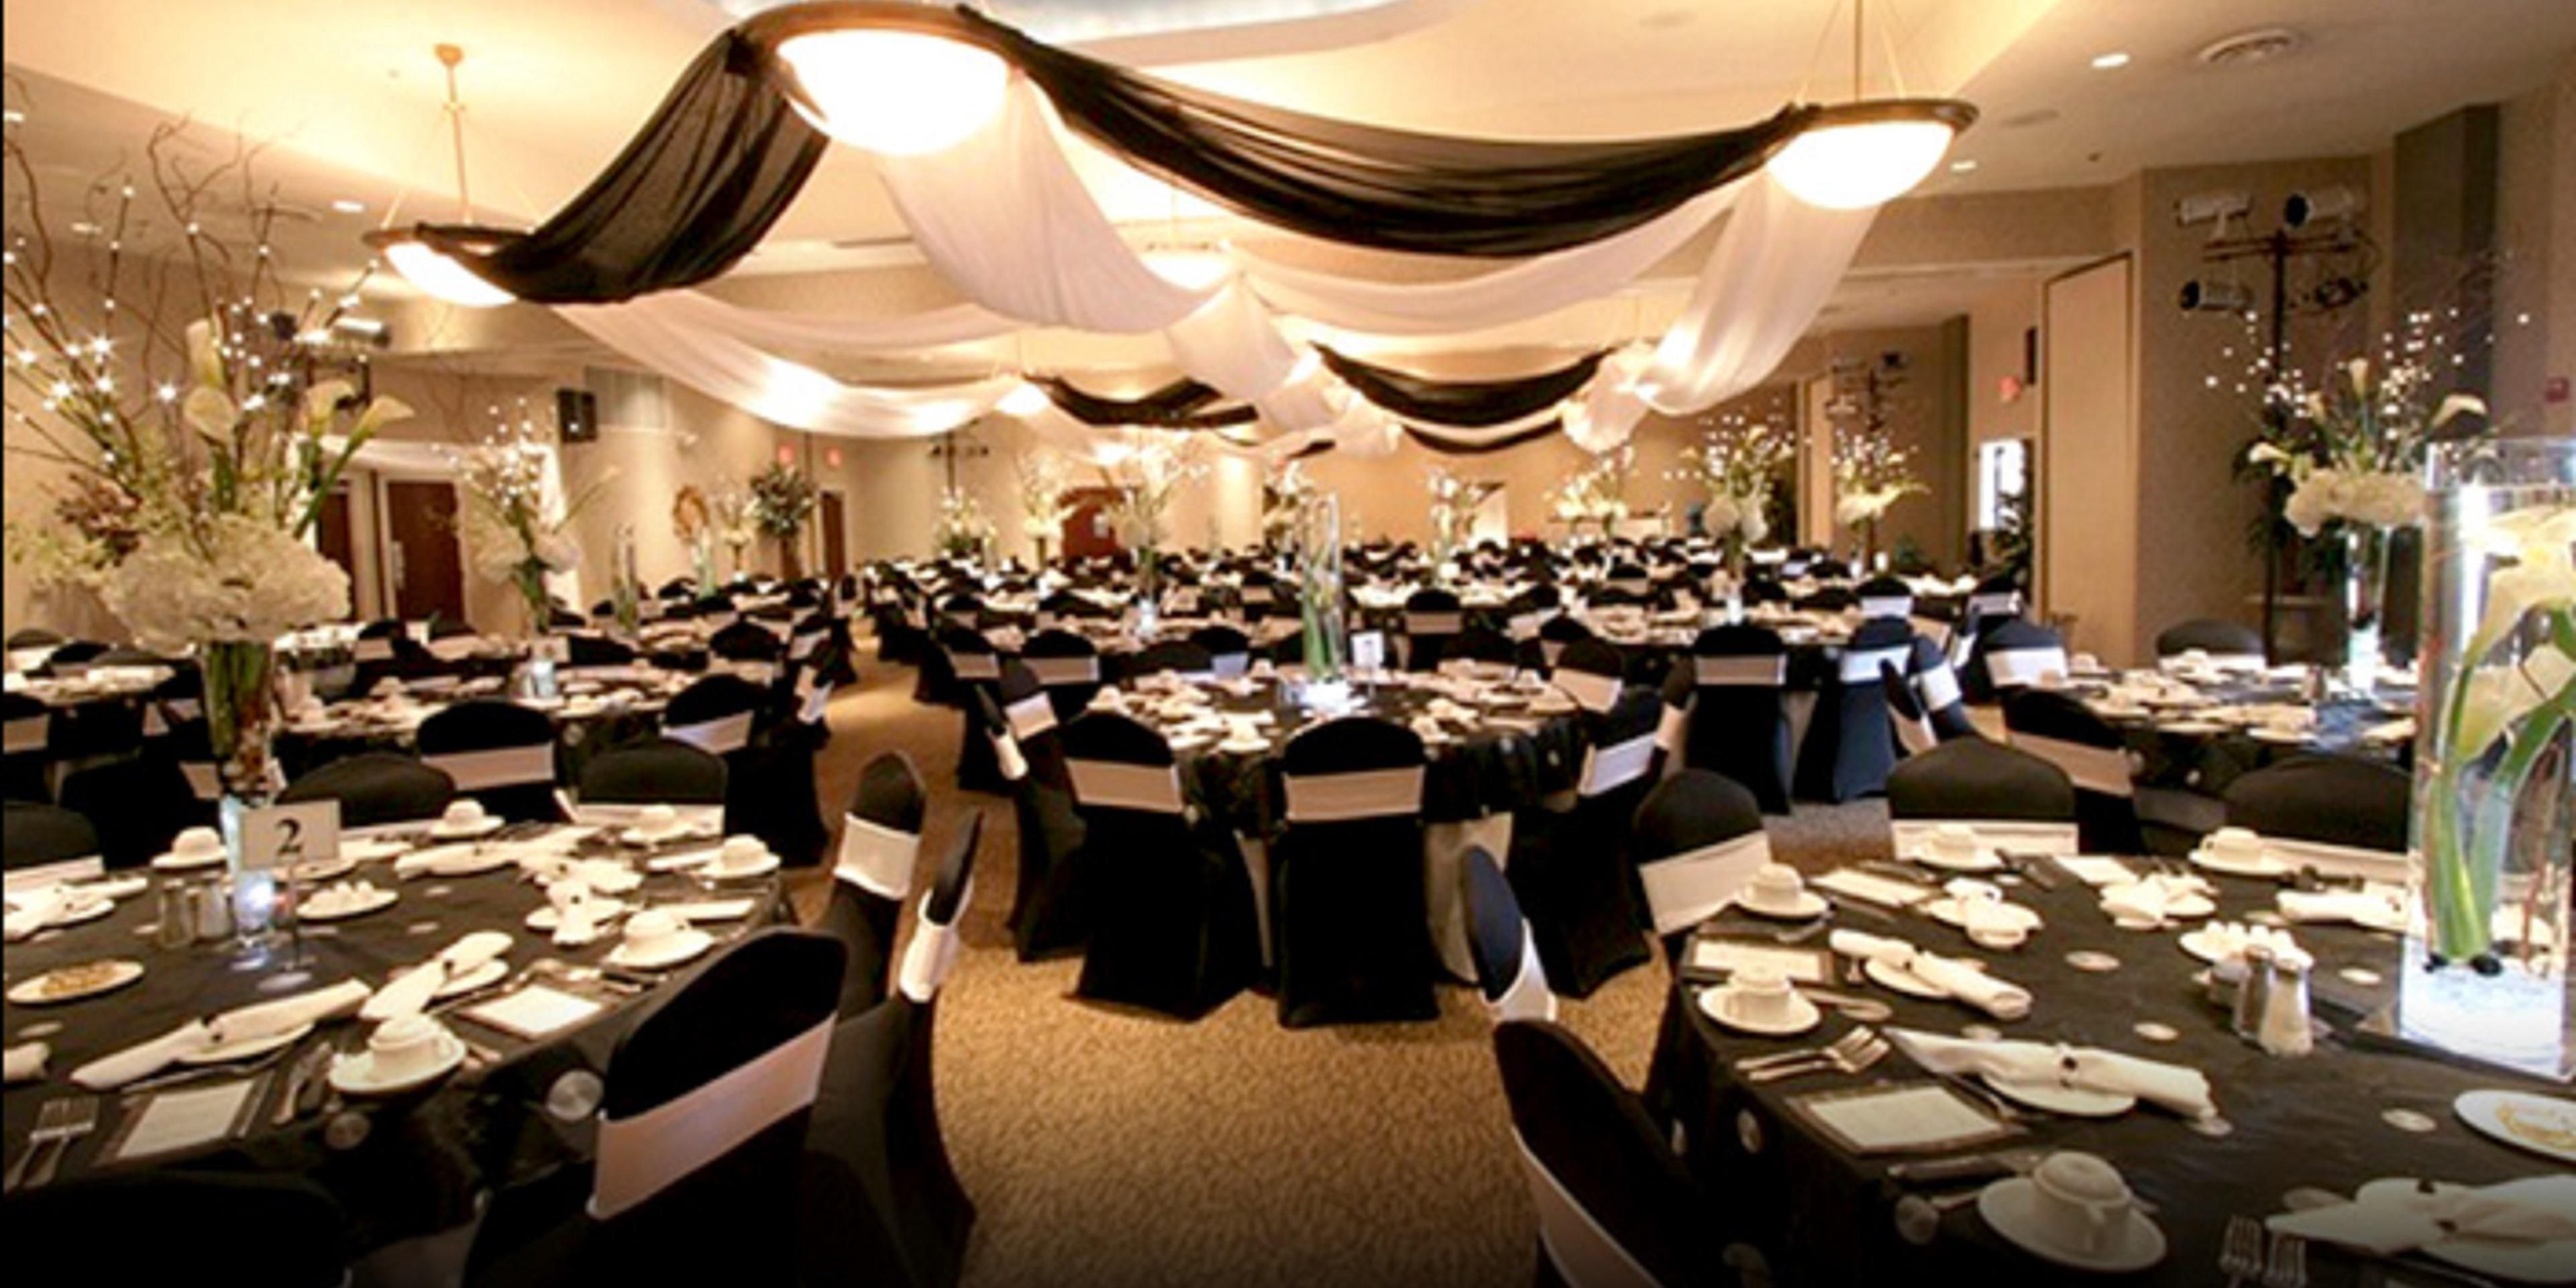 Make The Planning Easy.  The Holiday Inn Express & Suites Wadsworth, along with The Galaxy Event Center Welcome's you to the perfect wedding or rehearsal venue location.  One stop shopping for your overnight rooms and your special day.  